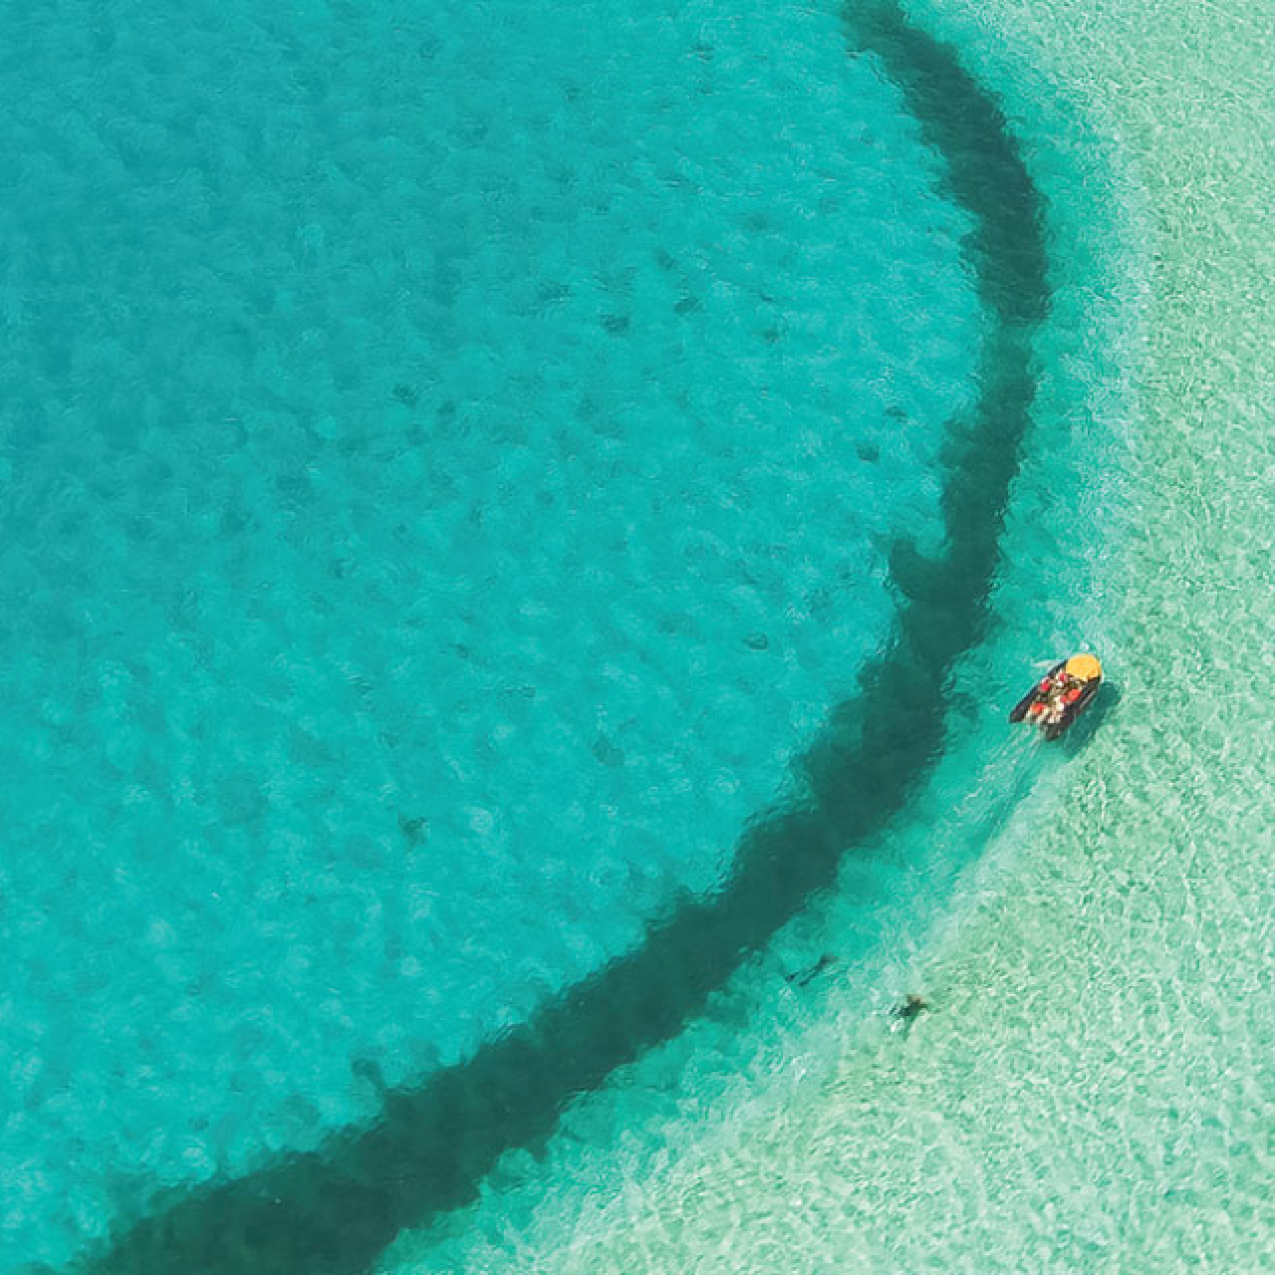 An aerial view of crystal clear green-blue water. A boat slowly moves in a circle with two people in the water snorkeling behind the boat.